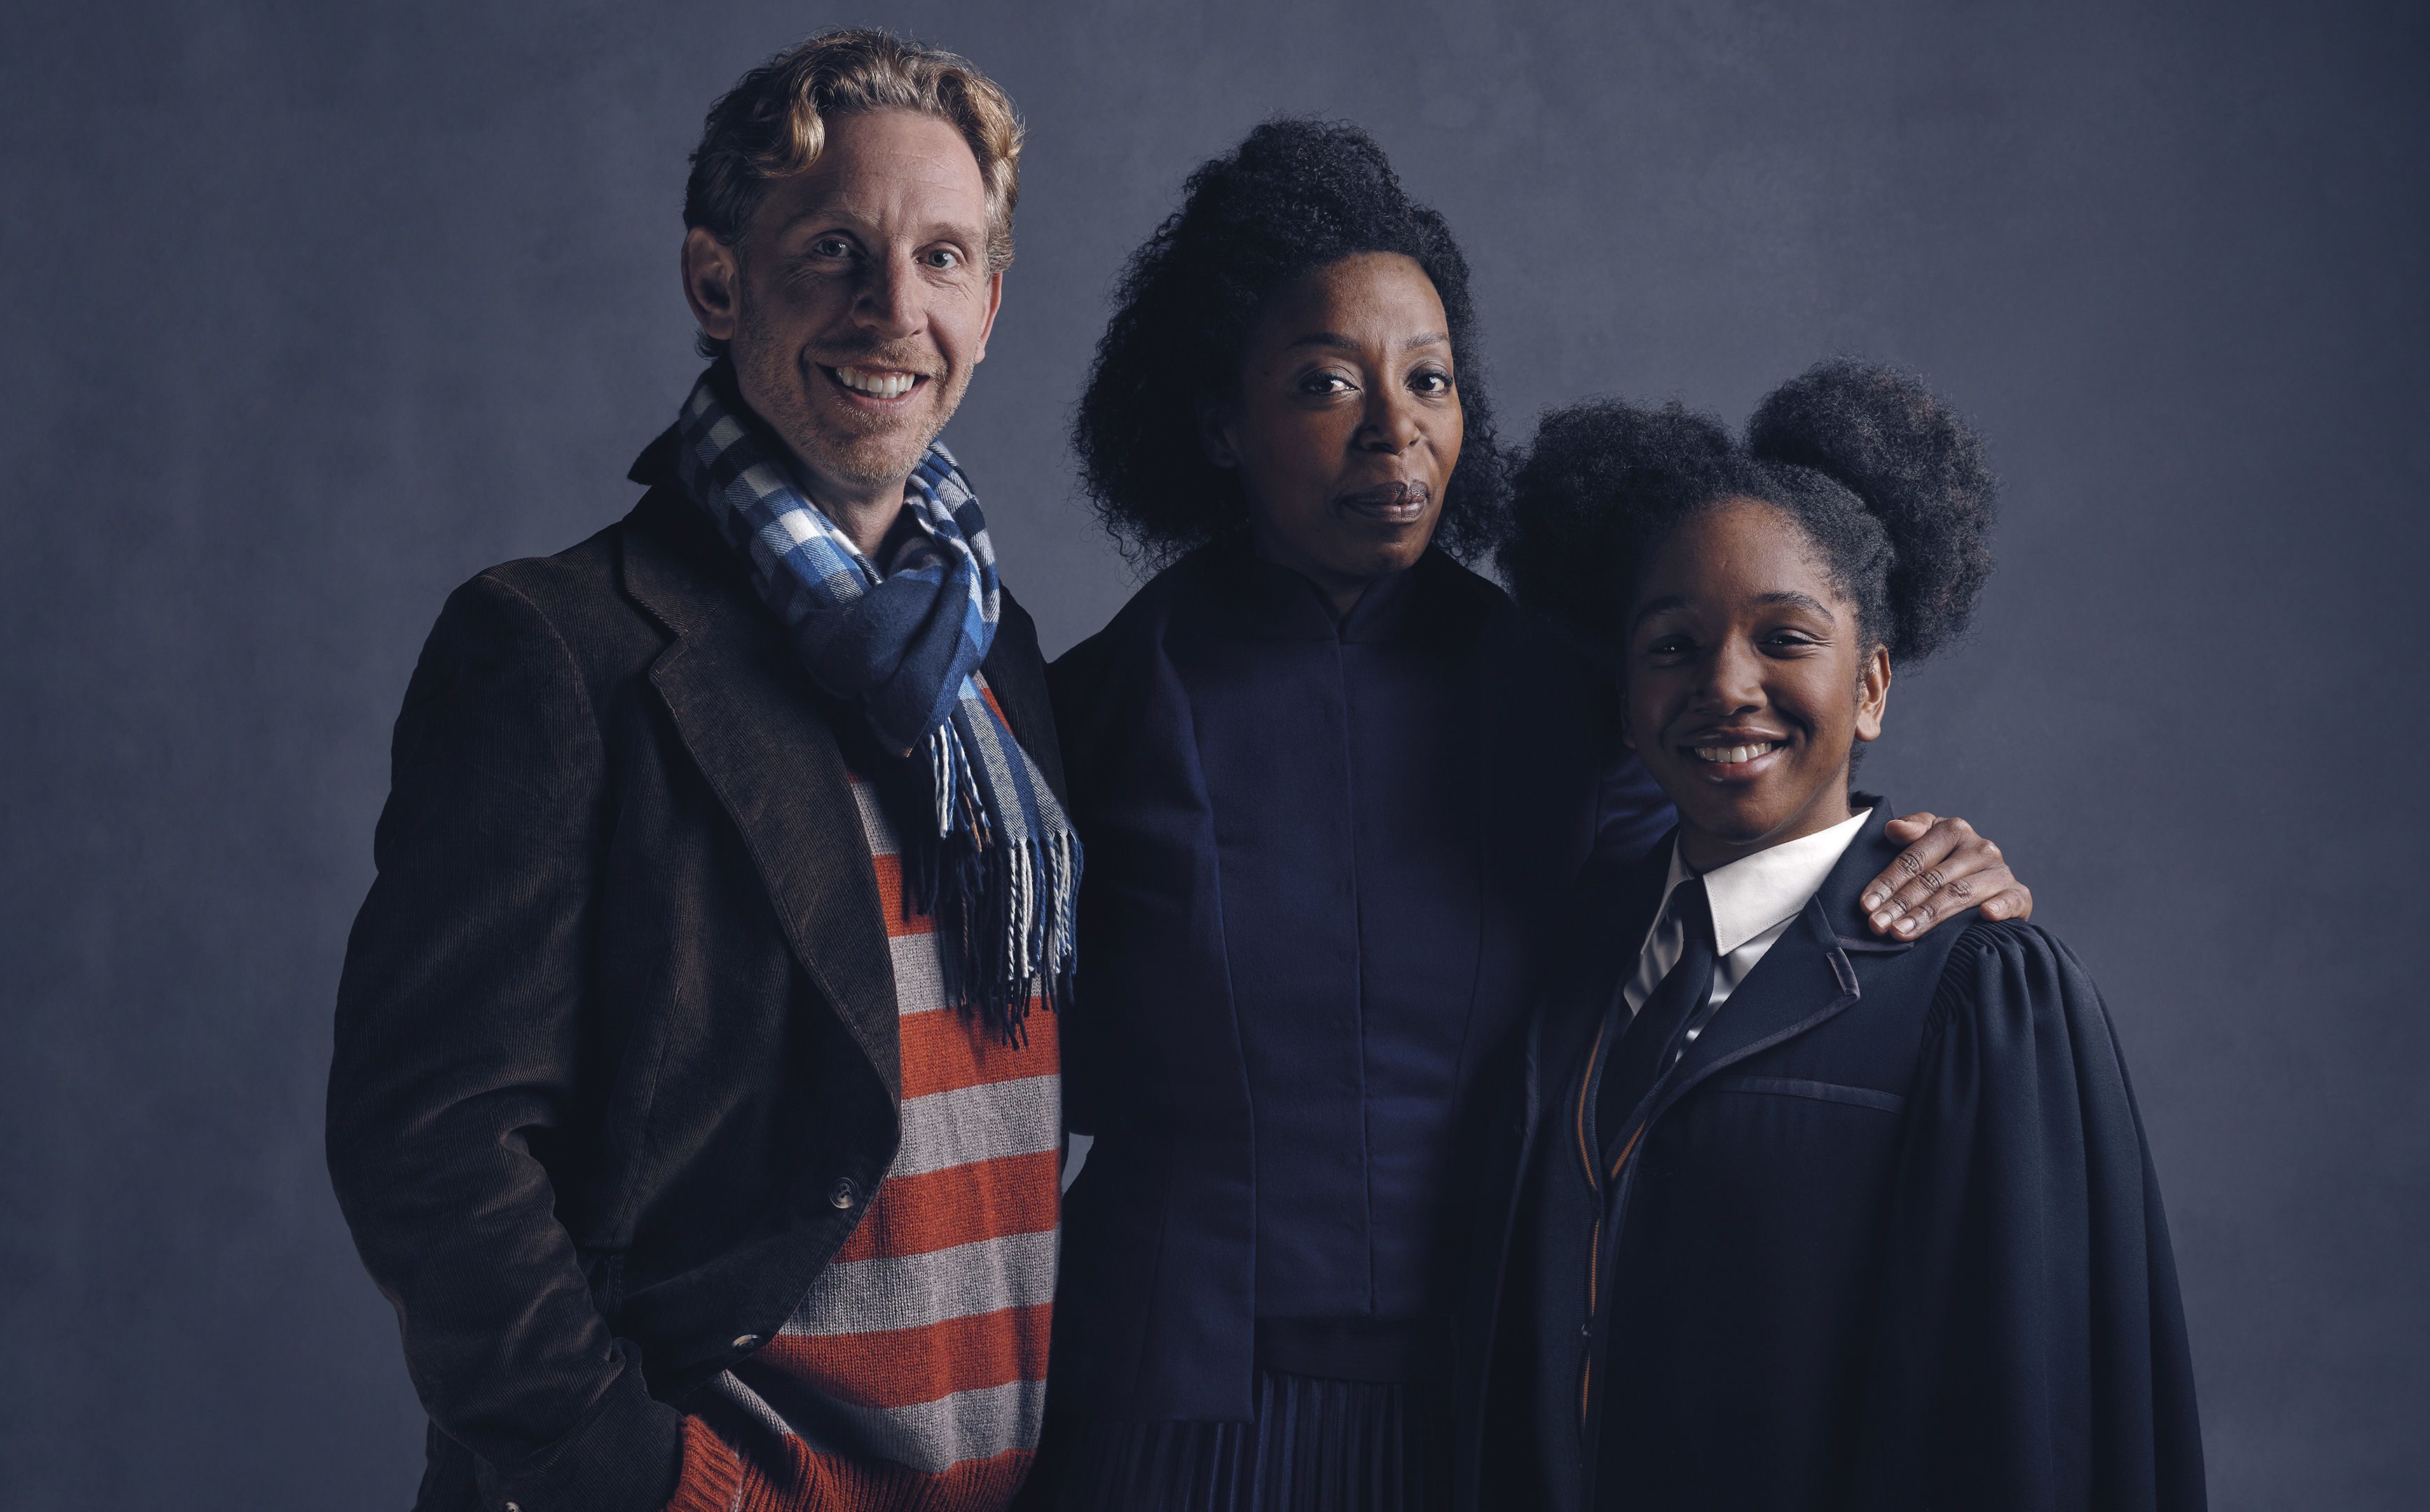 From left: Paul Thornley, Noma Dumezweni and Cherelle Skeete who will play Ron Weasley, Hermione Granger and Rose Granger-Weasley.